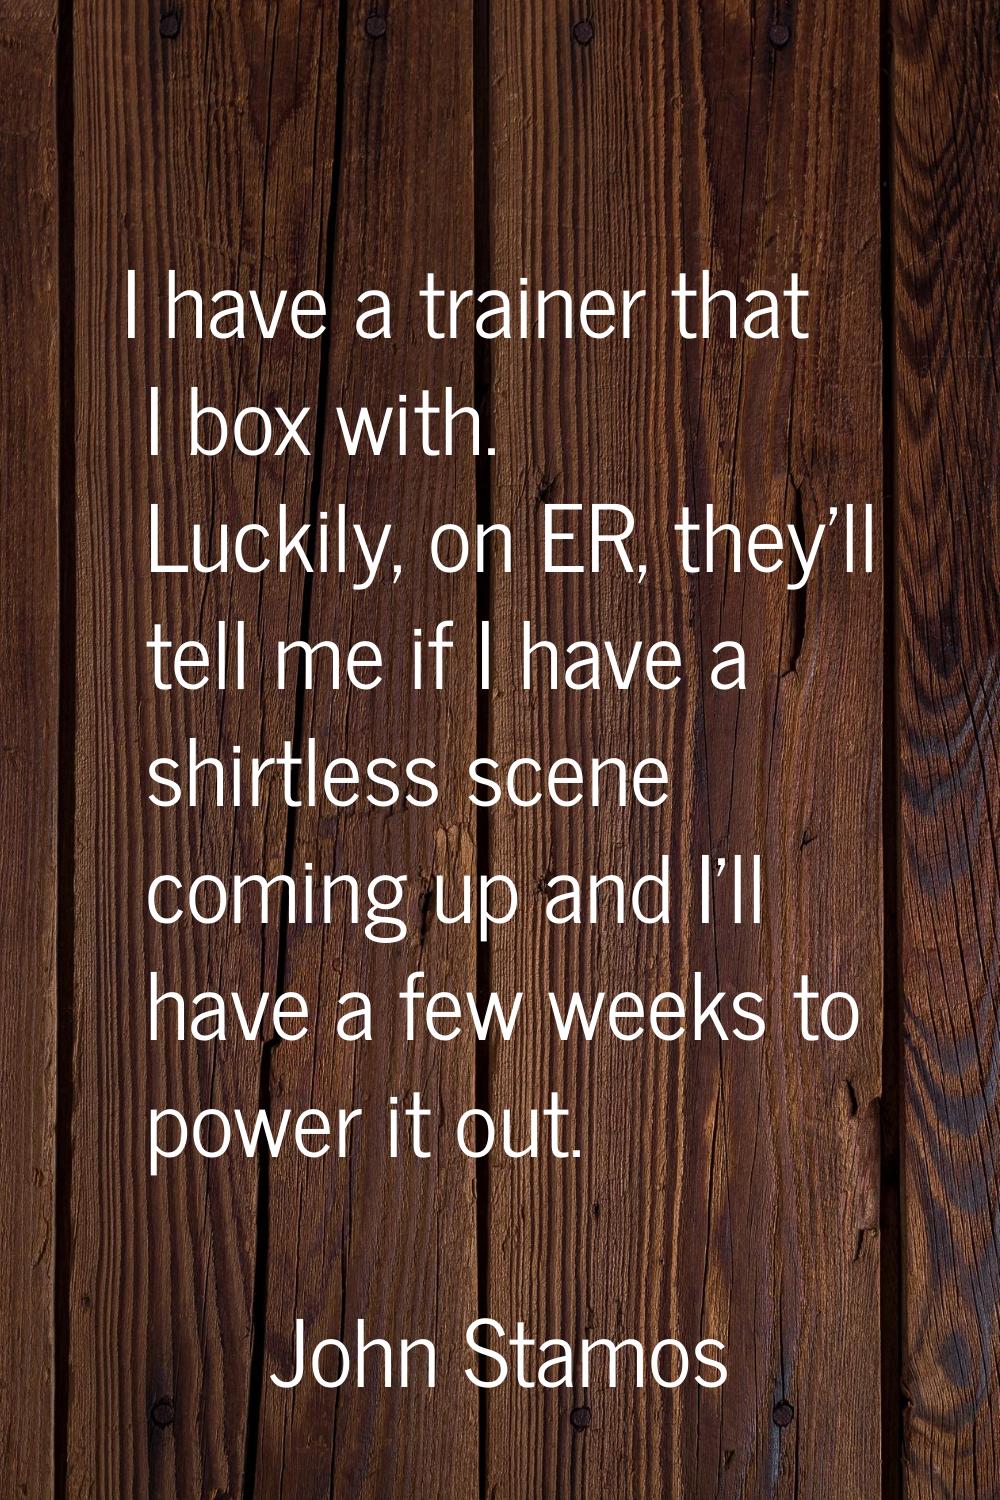 I have a trainer that I box with. Luckily, on ER, they'll tell me if I have a shirtless scene comin